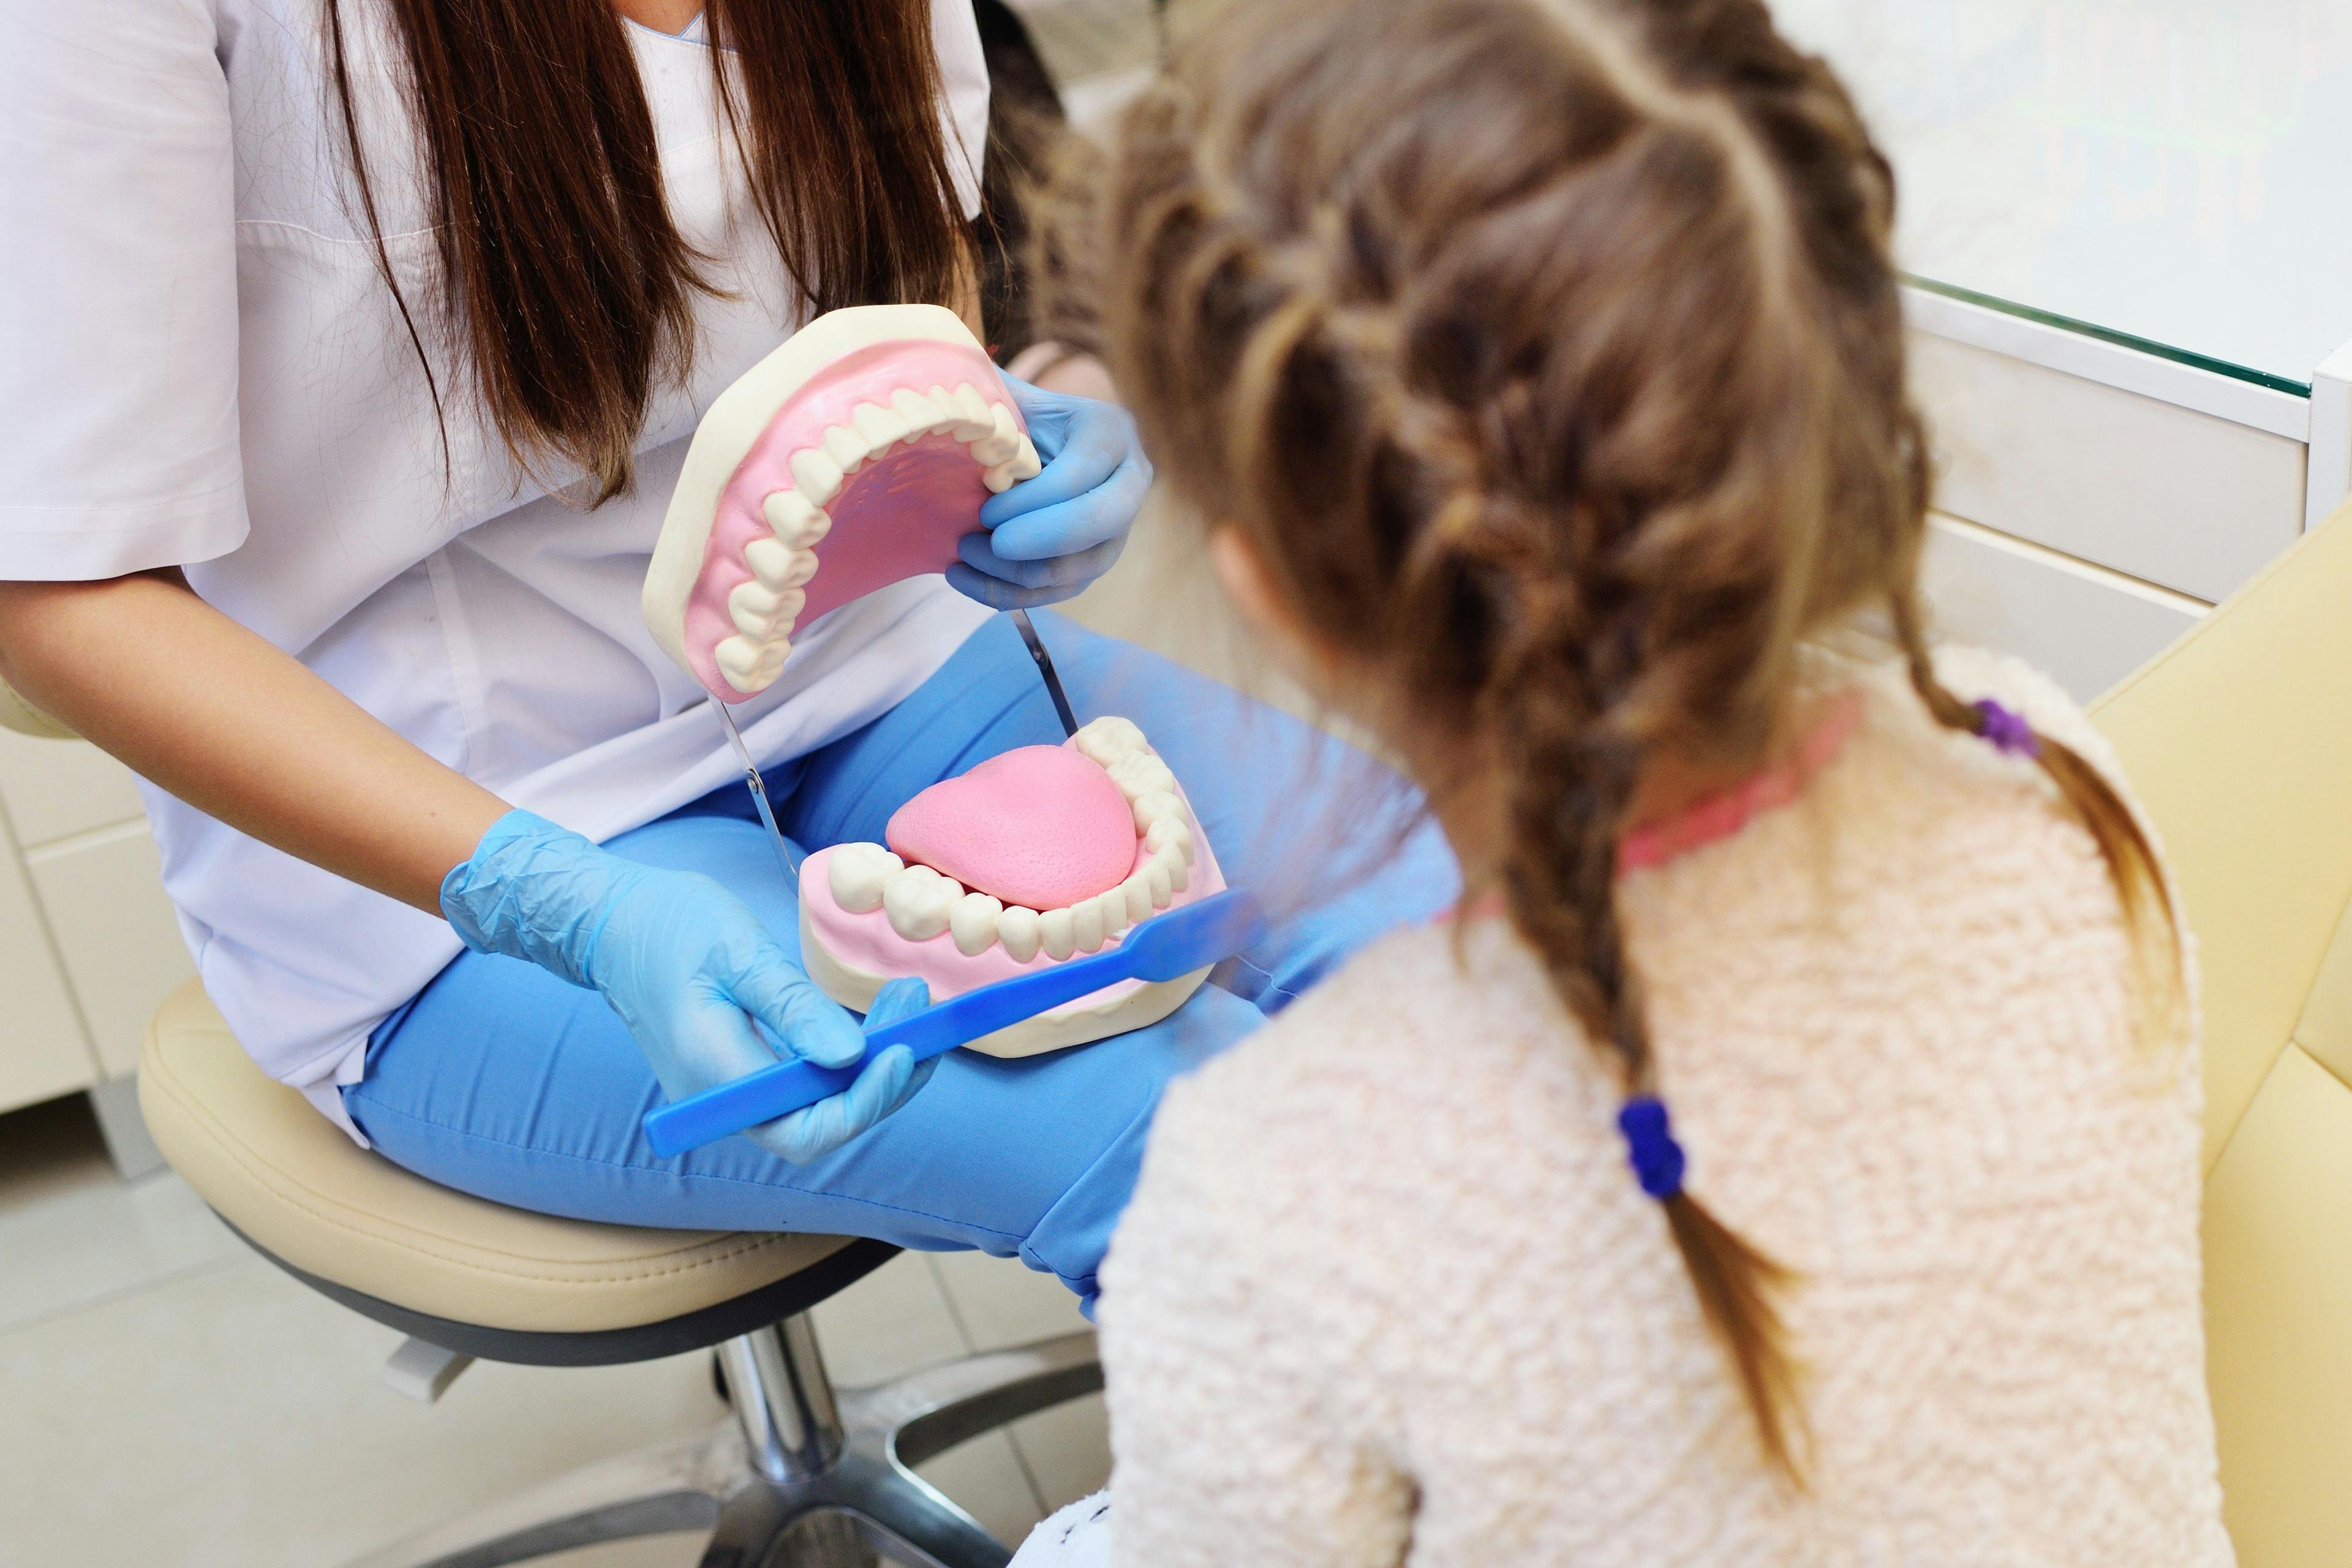 Dental care in primary practice: Where we fit in